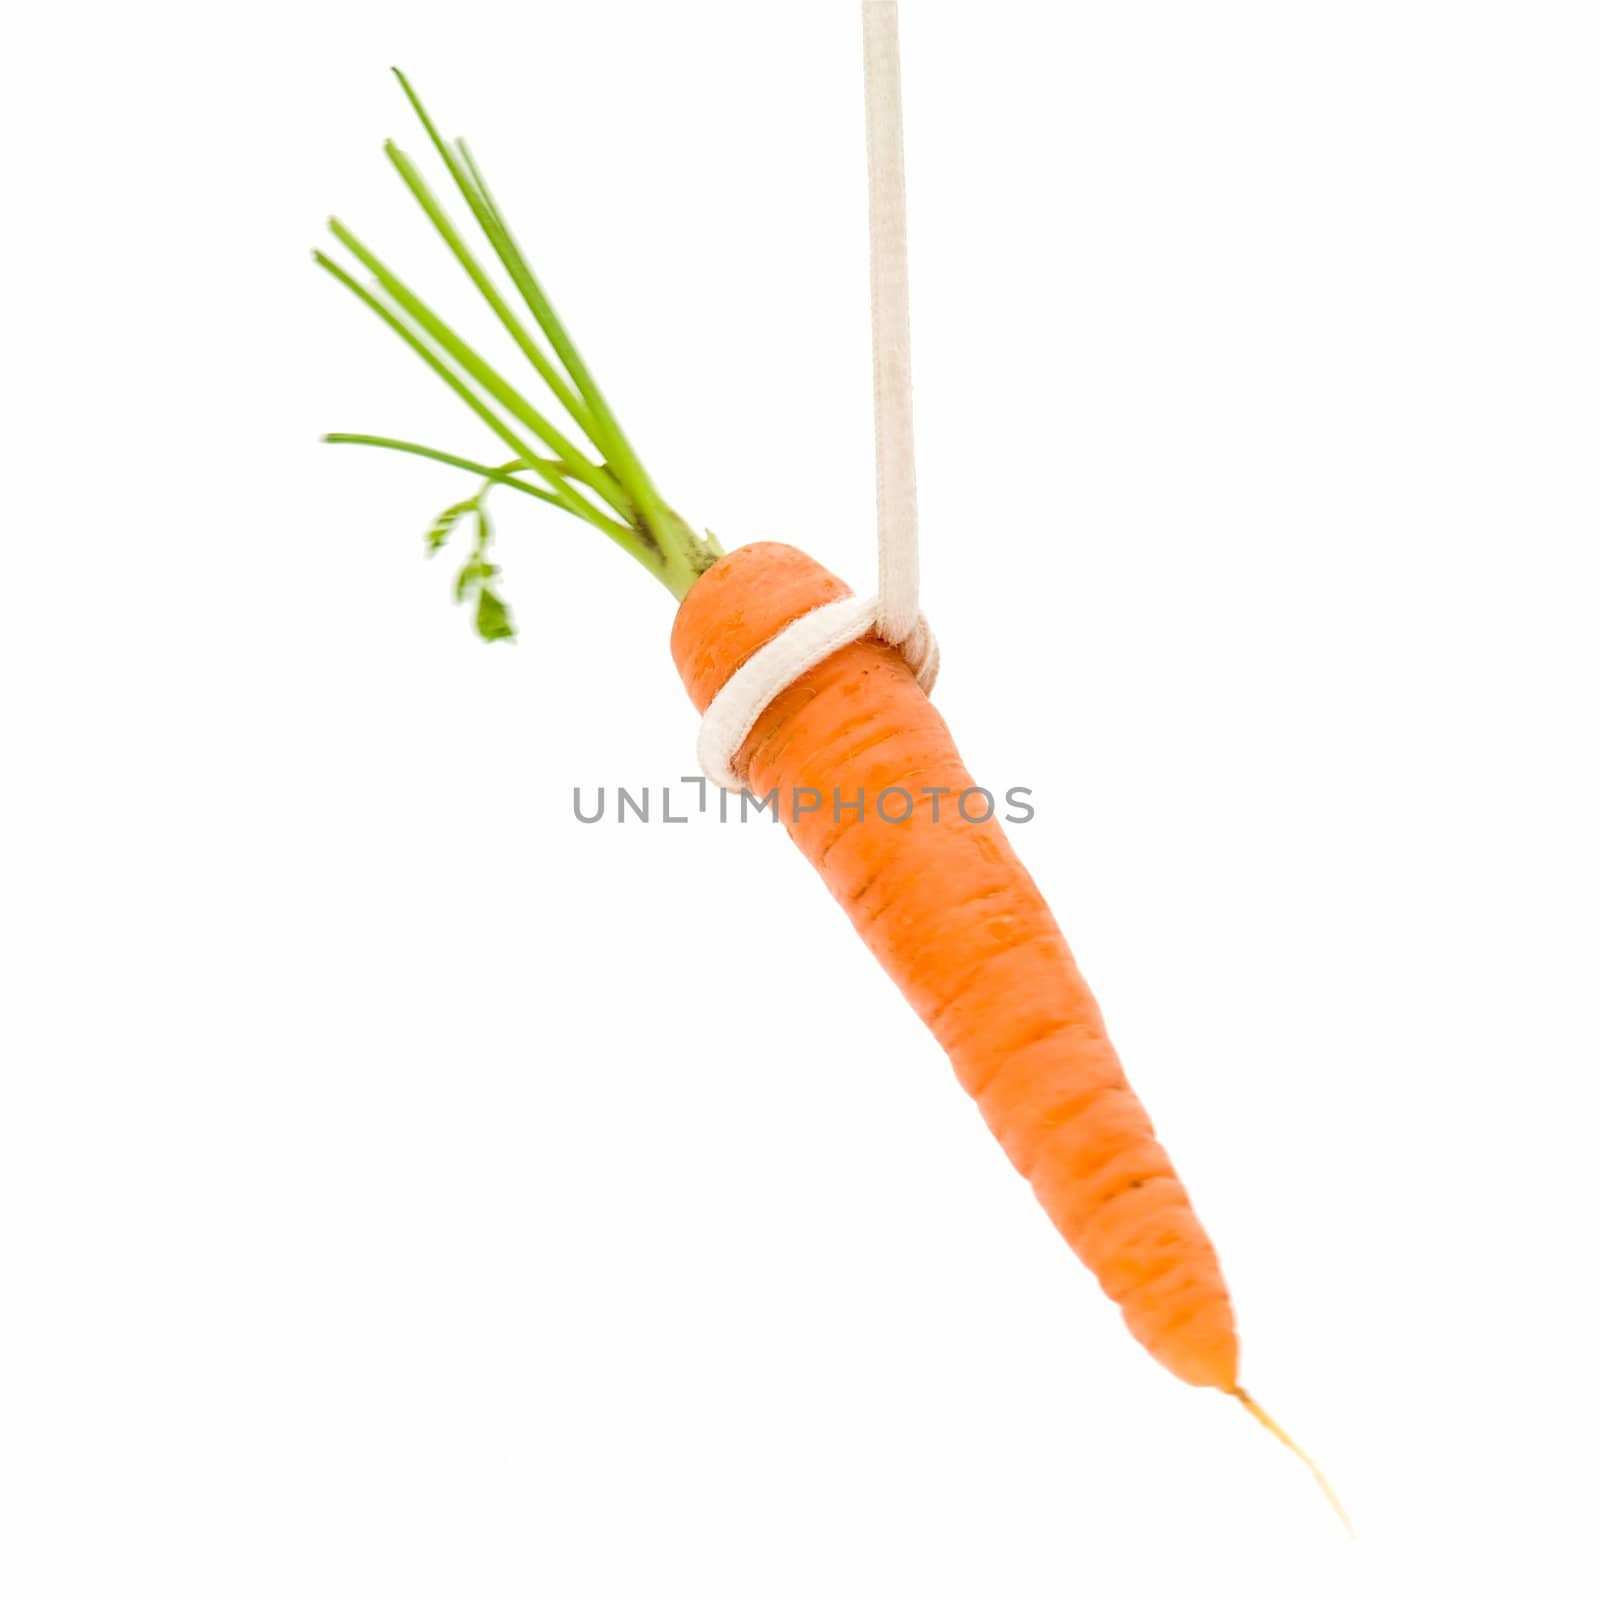 Bait. Small carrot on a white background.